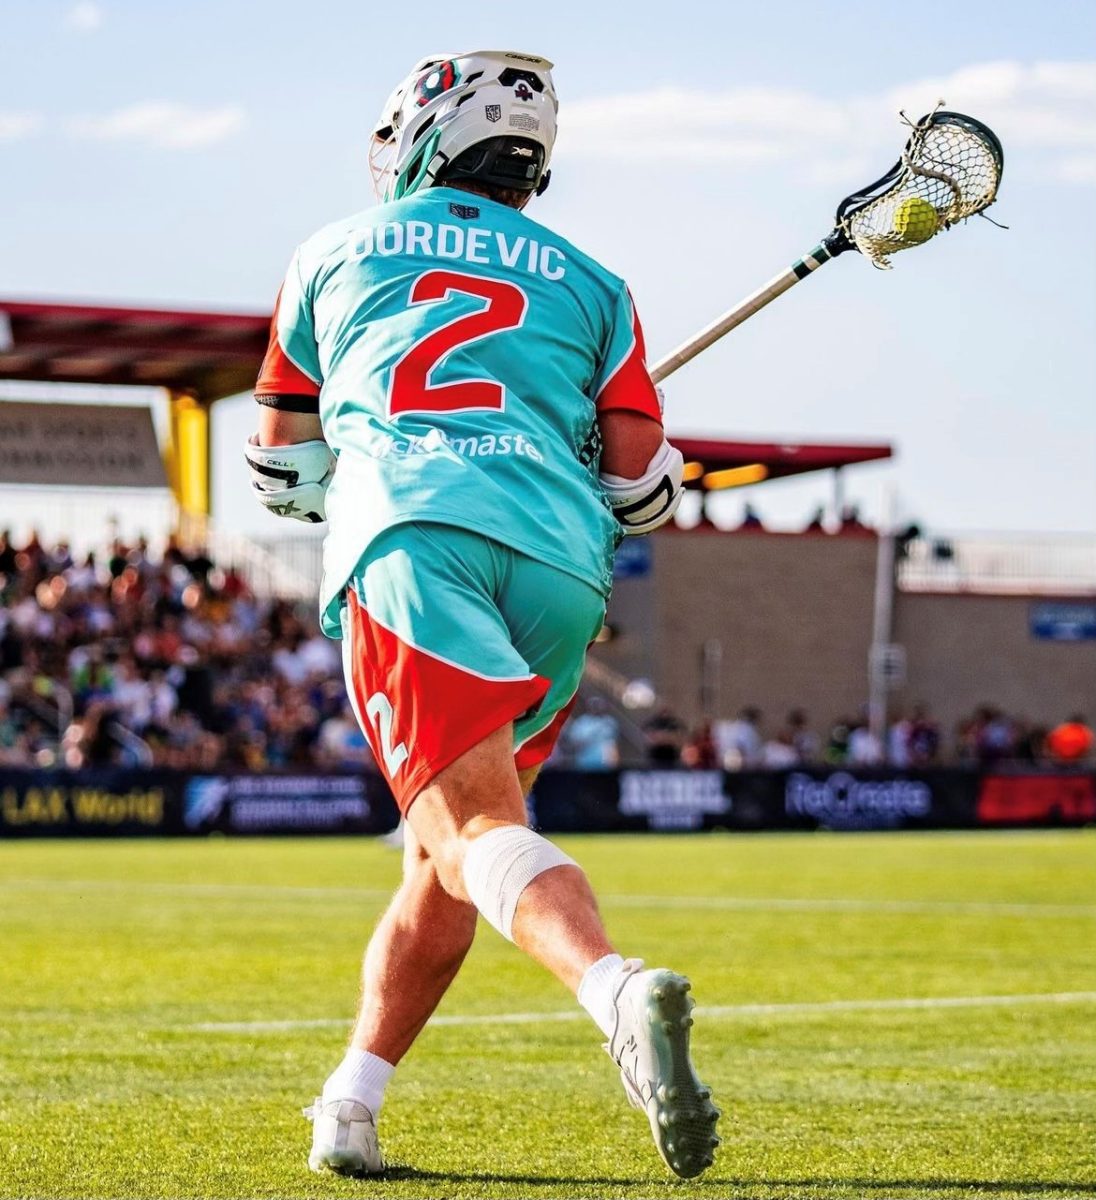 Tucker Dordevic, a 2017 Jesuit Graduate, now plays outdoor lacrosse professionally for the Whipsnakes Lacrosse Club after successful a successful and proficient lacrosse career in college (courtesy Tucker Dordevic)